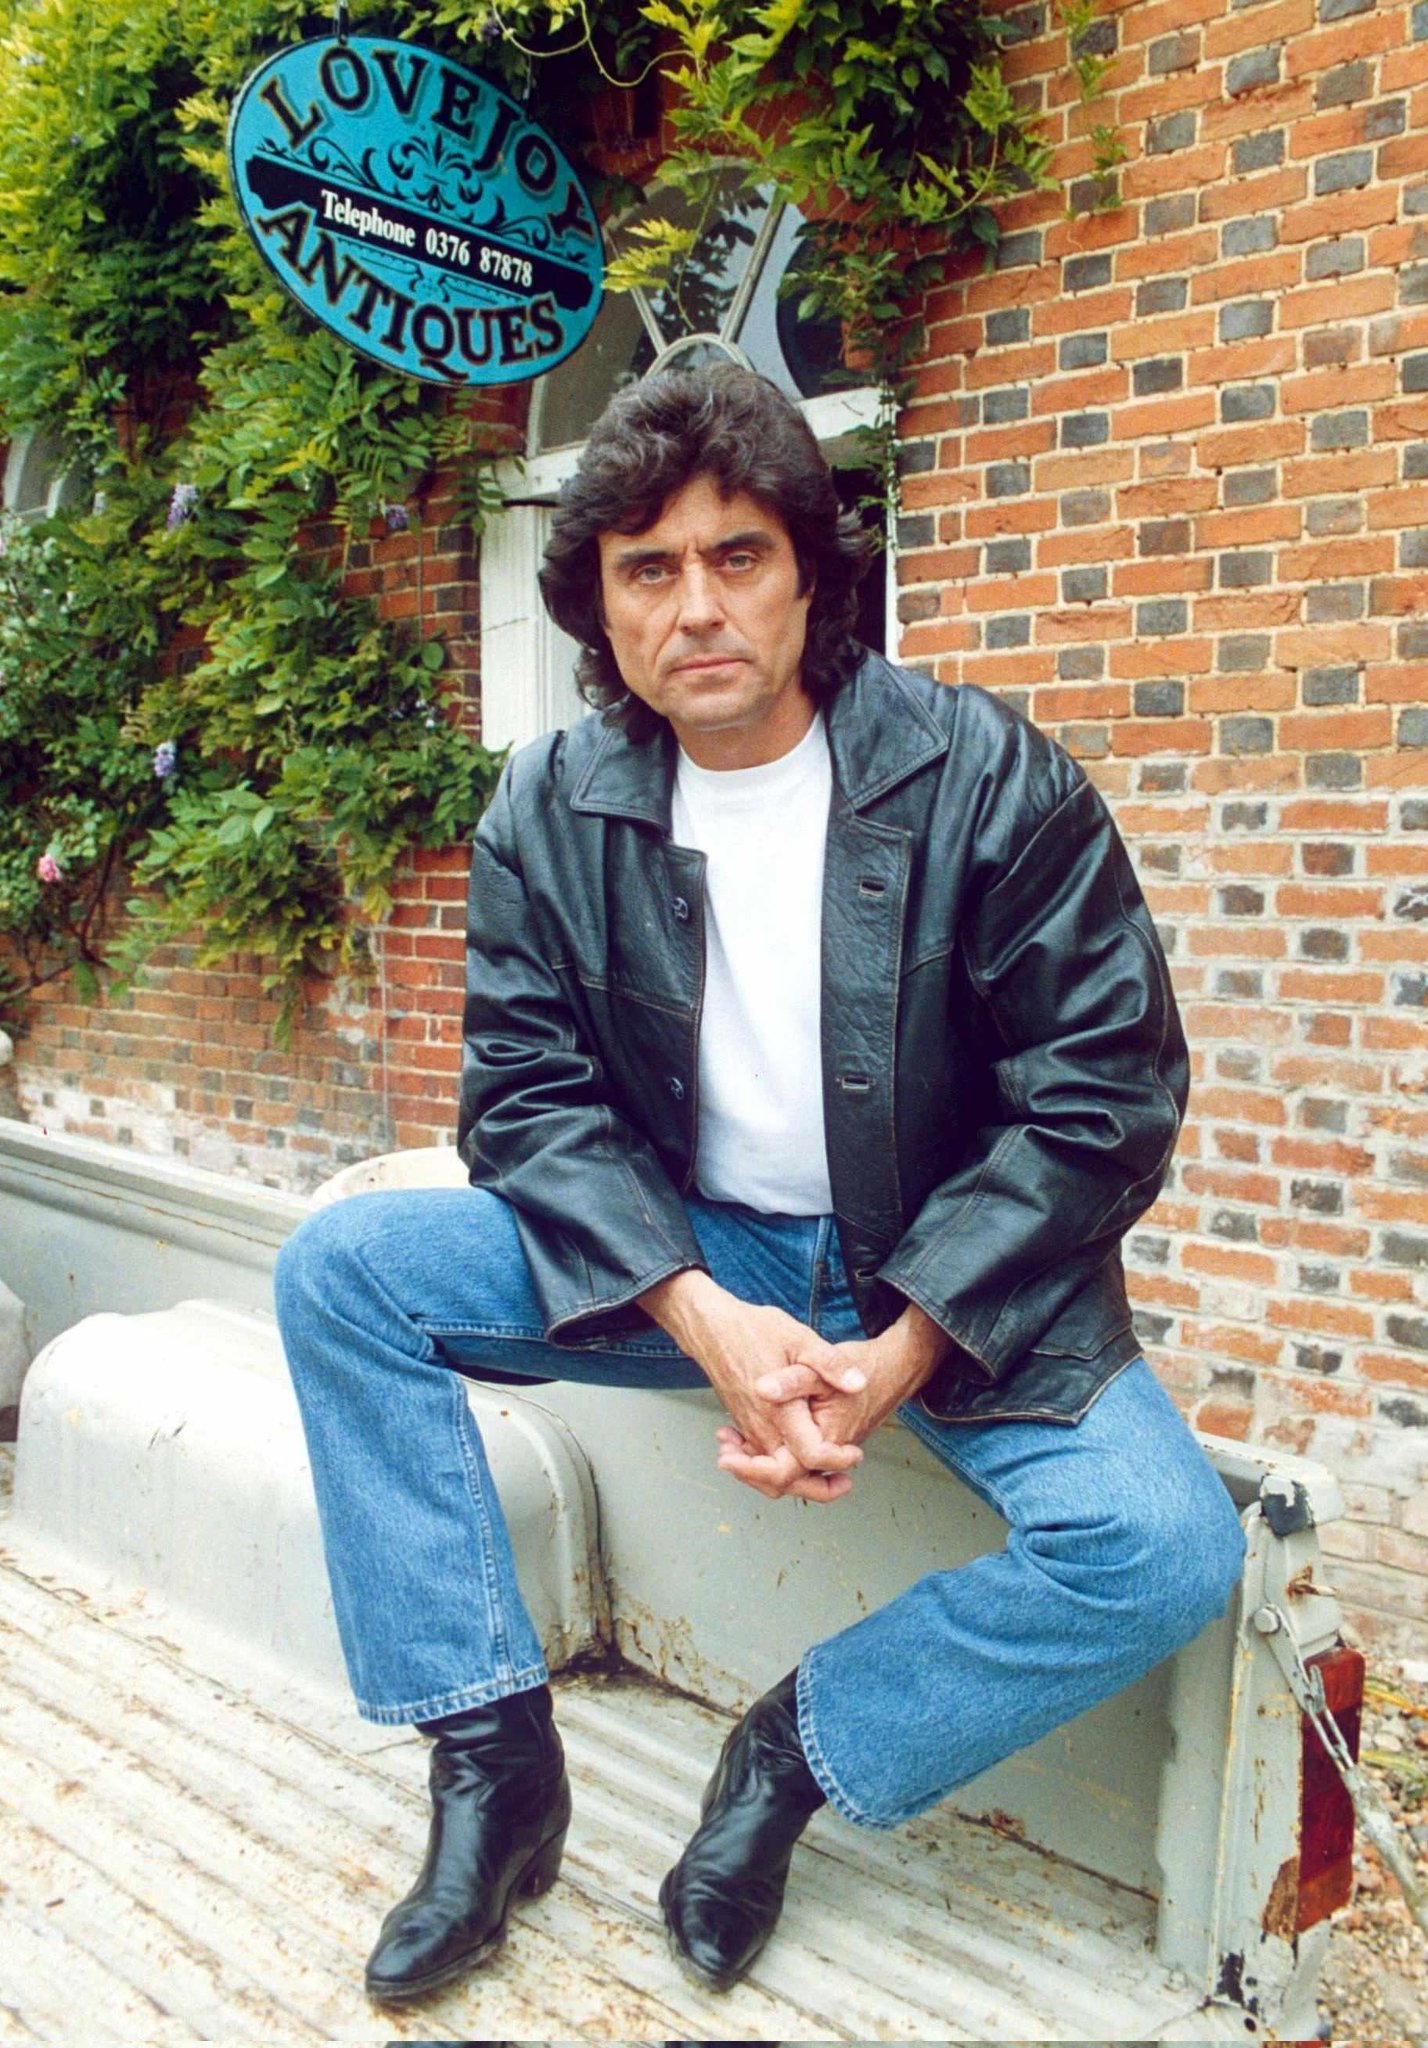 Happy Birthday English actor Ian McShane, now 79 years old. Lovejoy 1986-1994, 71 episodes. 